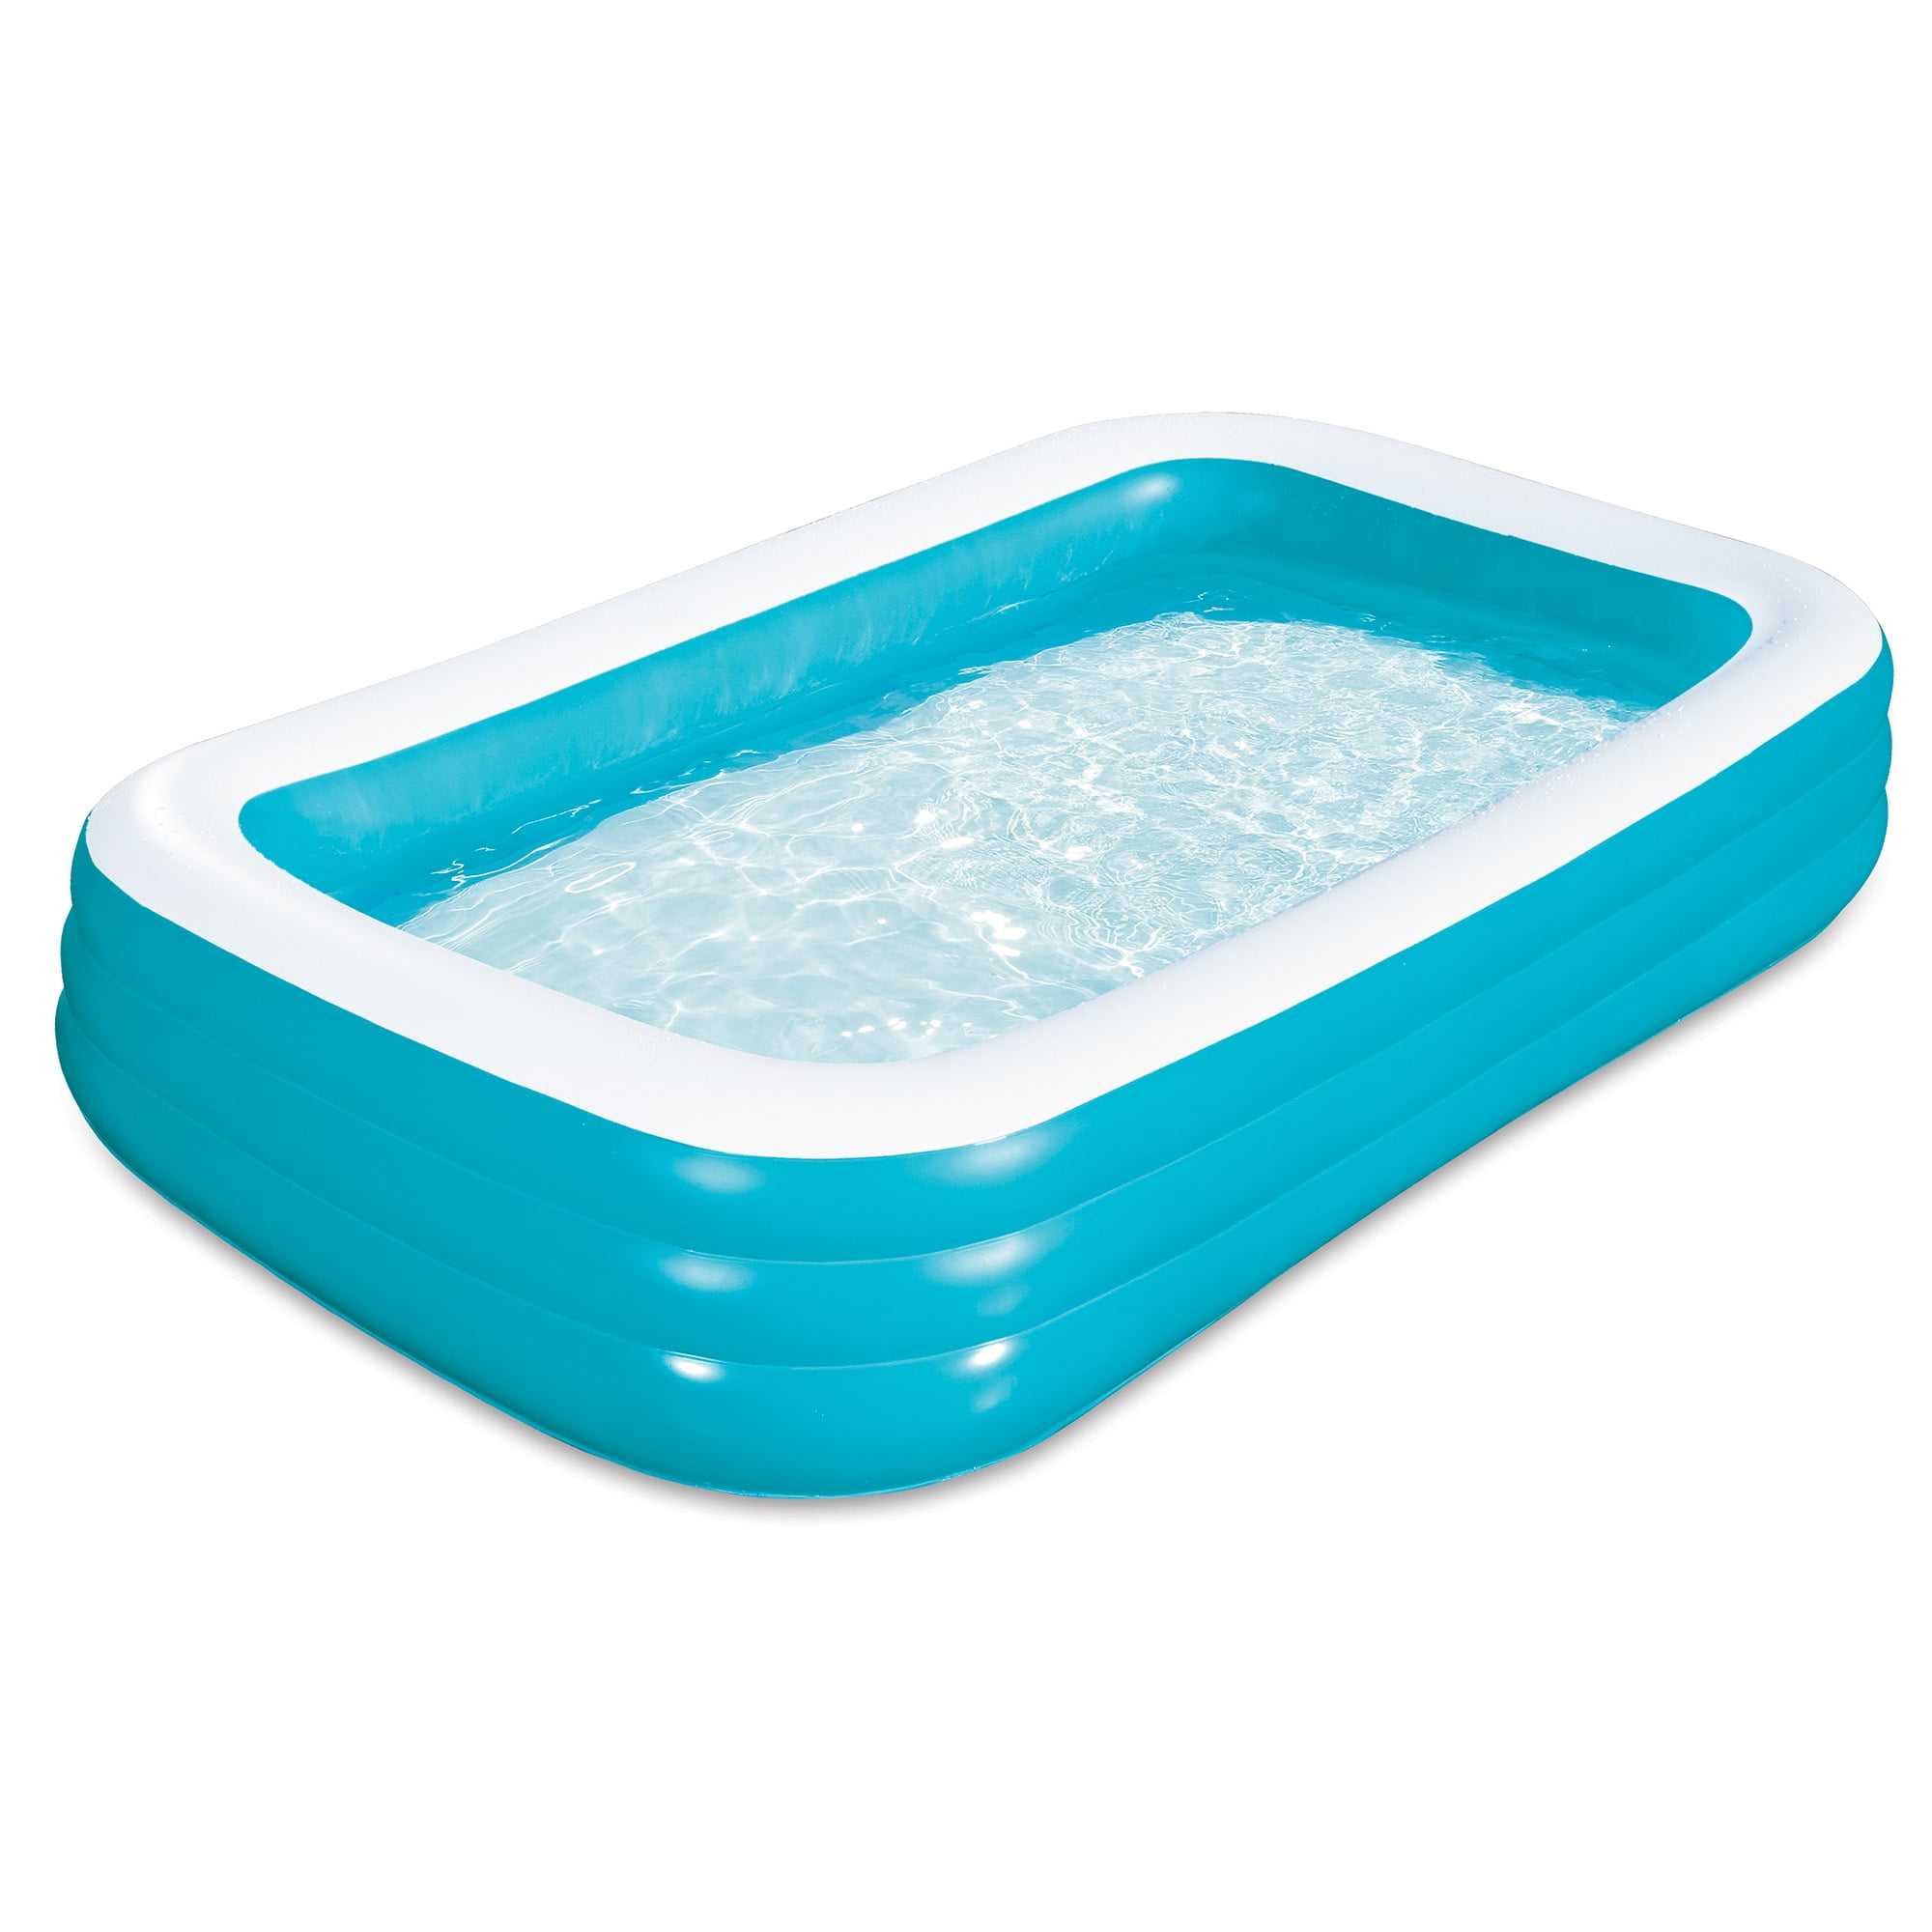 10-Foot Rectangular Inflatable Family Pool, Blue, Ages 6 and Up, Unisex -  